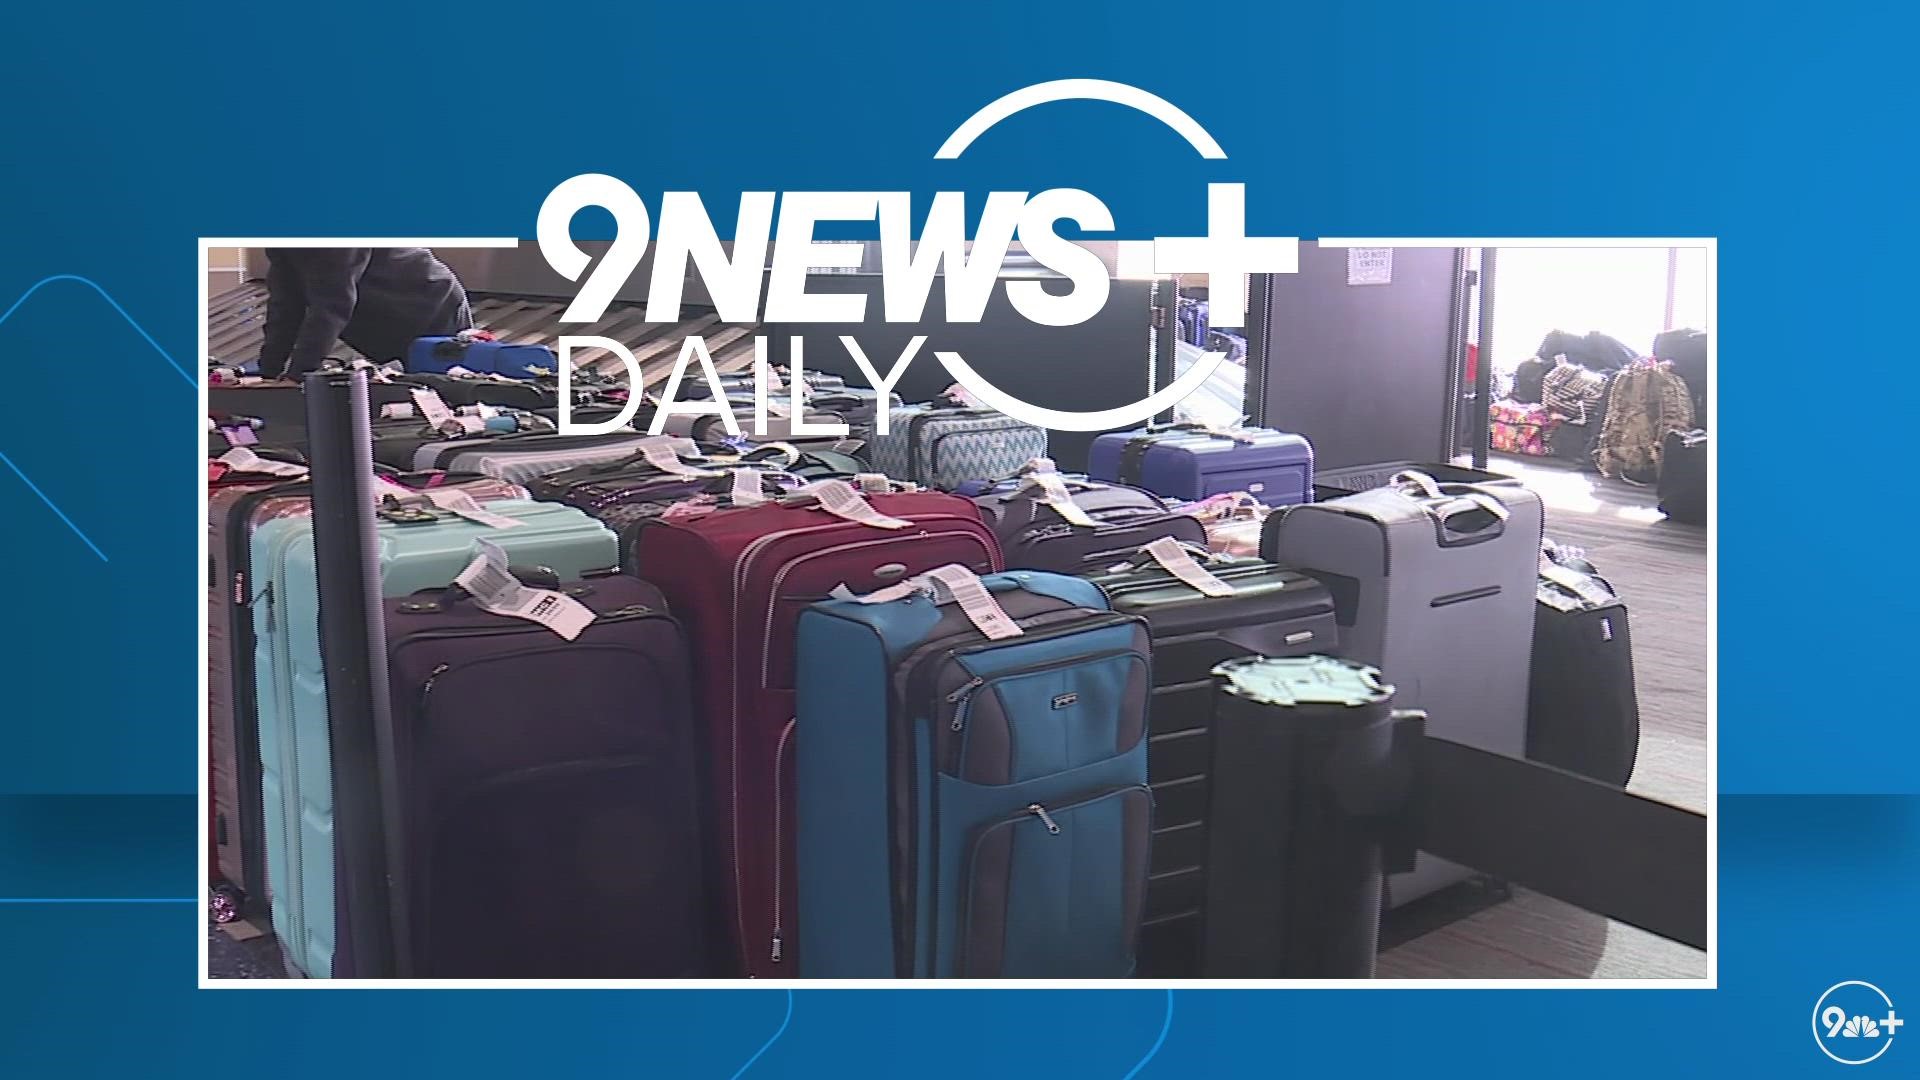 9NEWS aviation expert Greg Feith discusses the different factors leading to the surge of canceled flights by Southwest Airlines over the holidays.